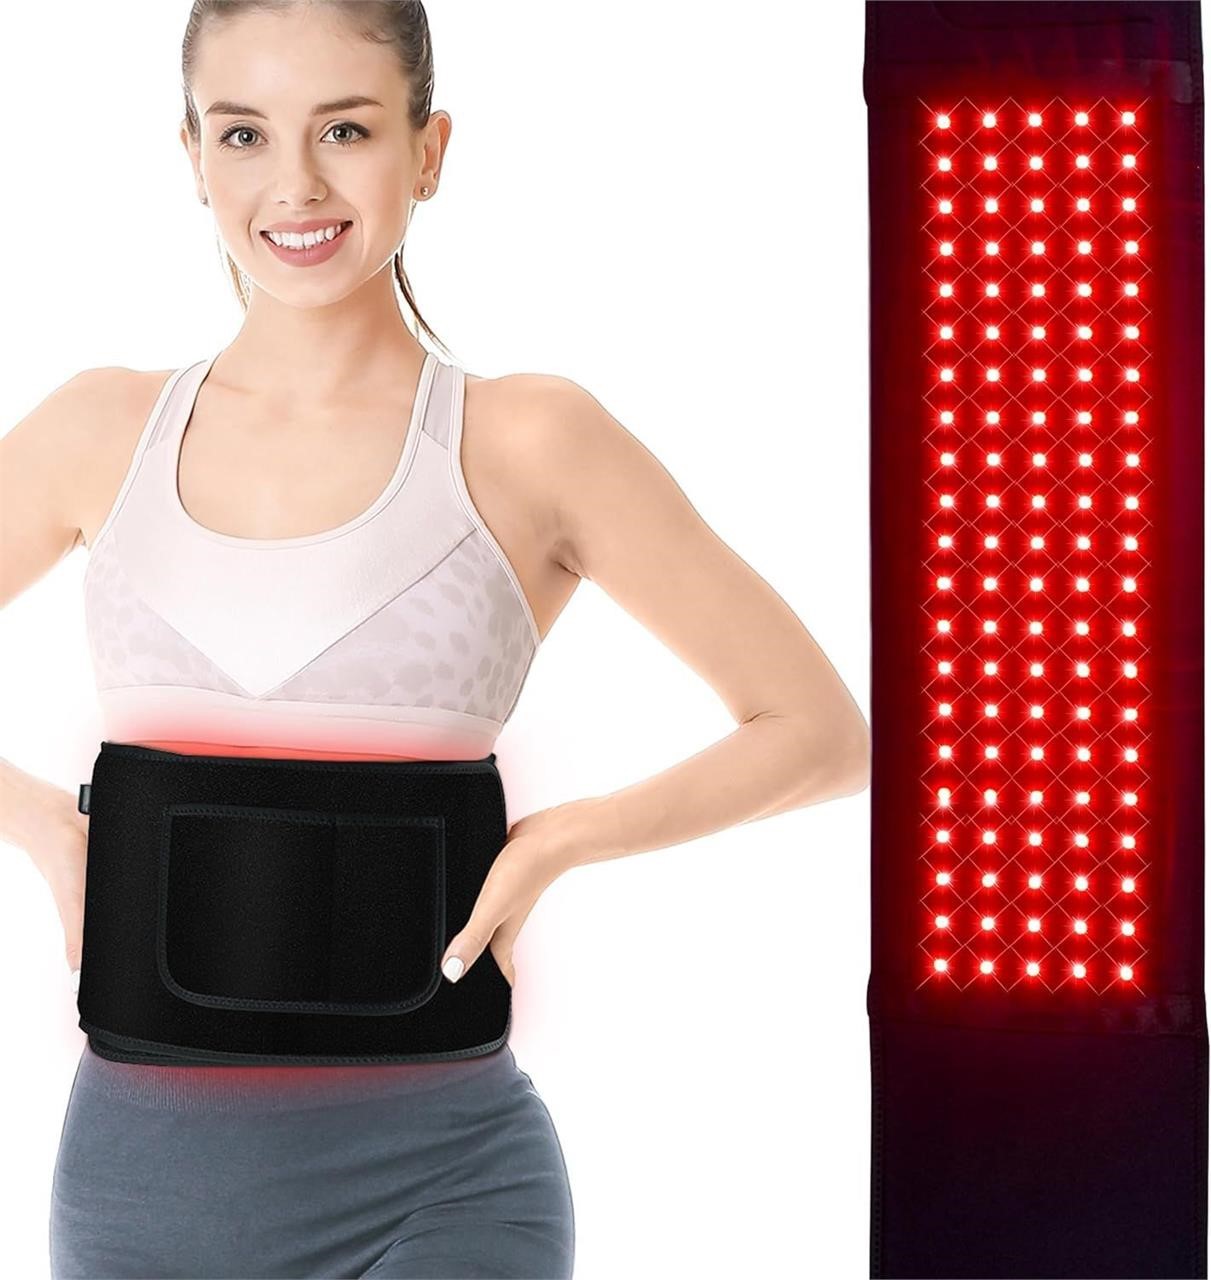 NEW $131 LED Red Light Therapy Lamp Belt/Body Wrap